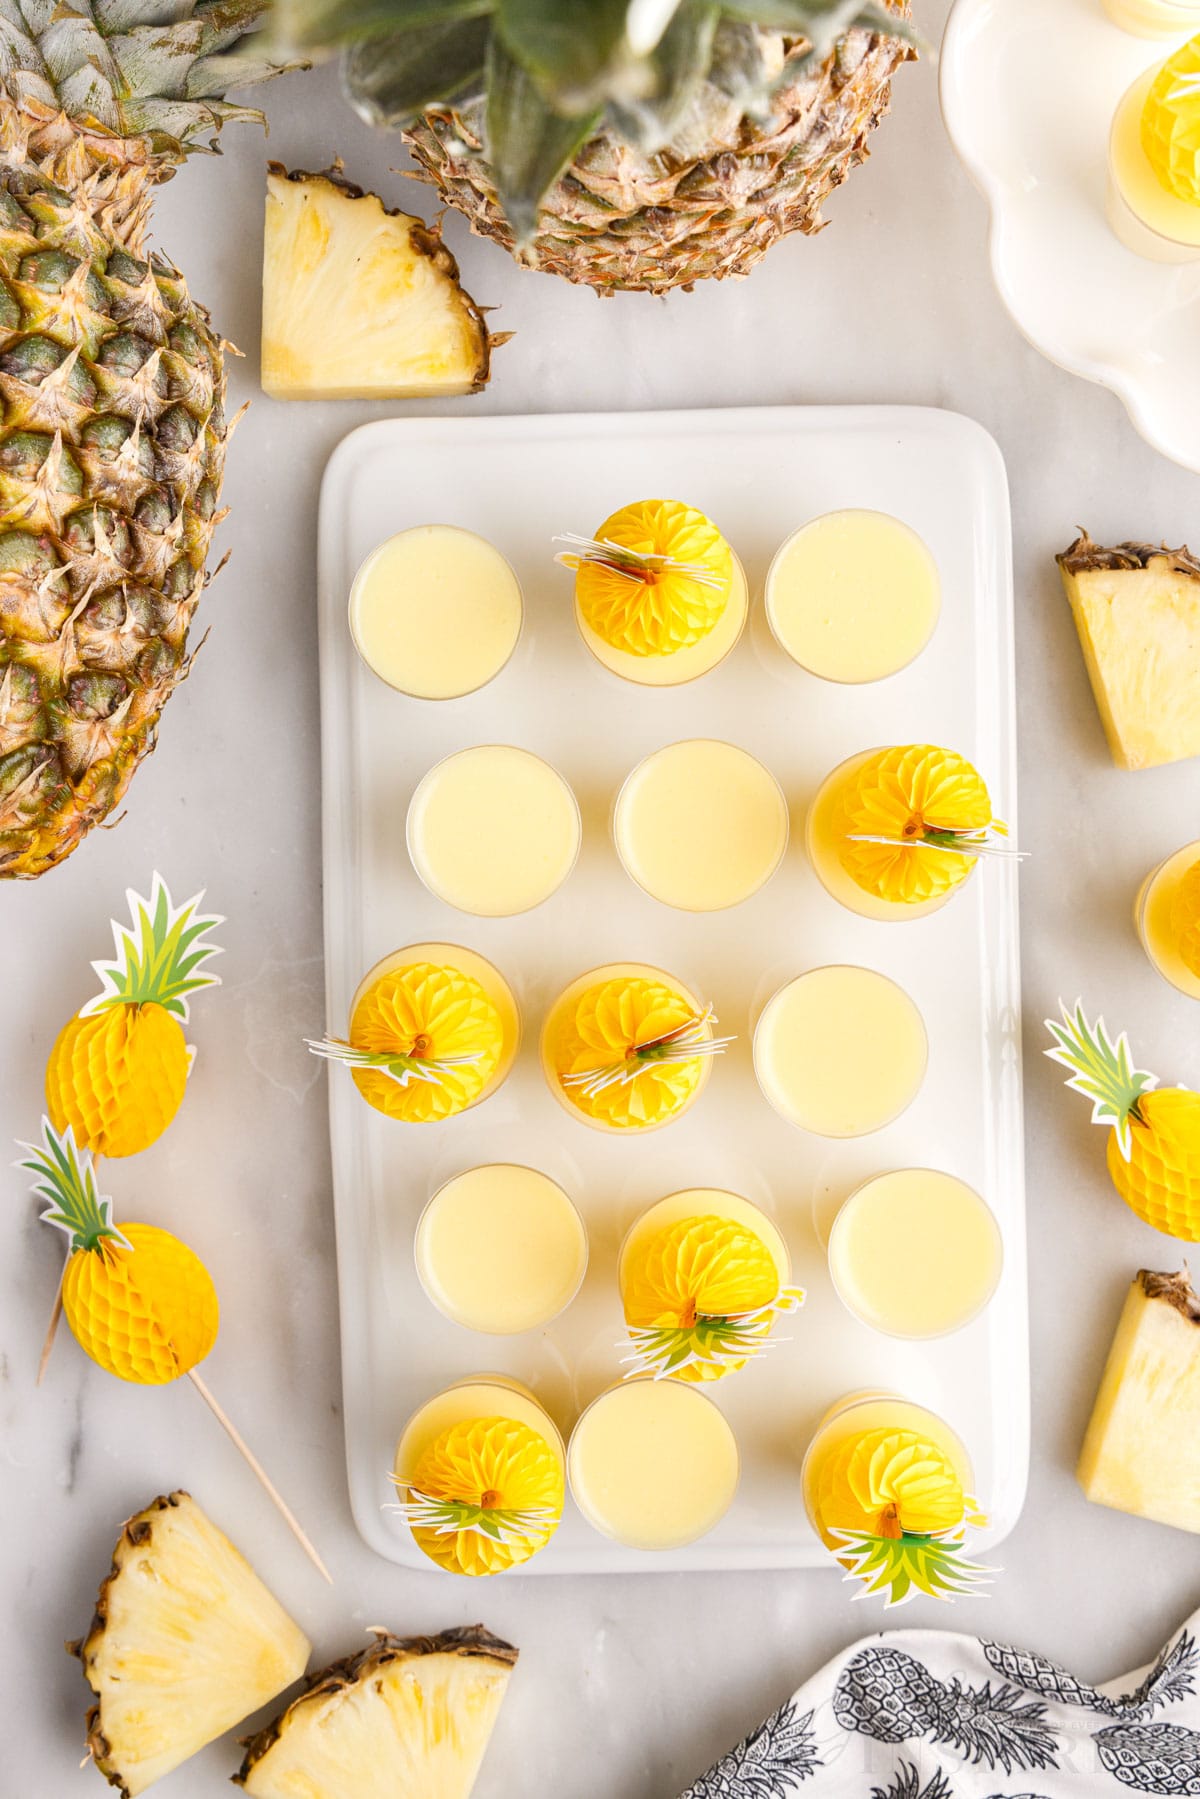 top view of dole whip jello shots on a tray next to pineapple slices